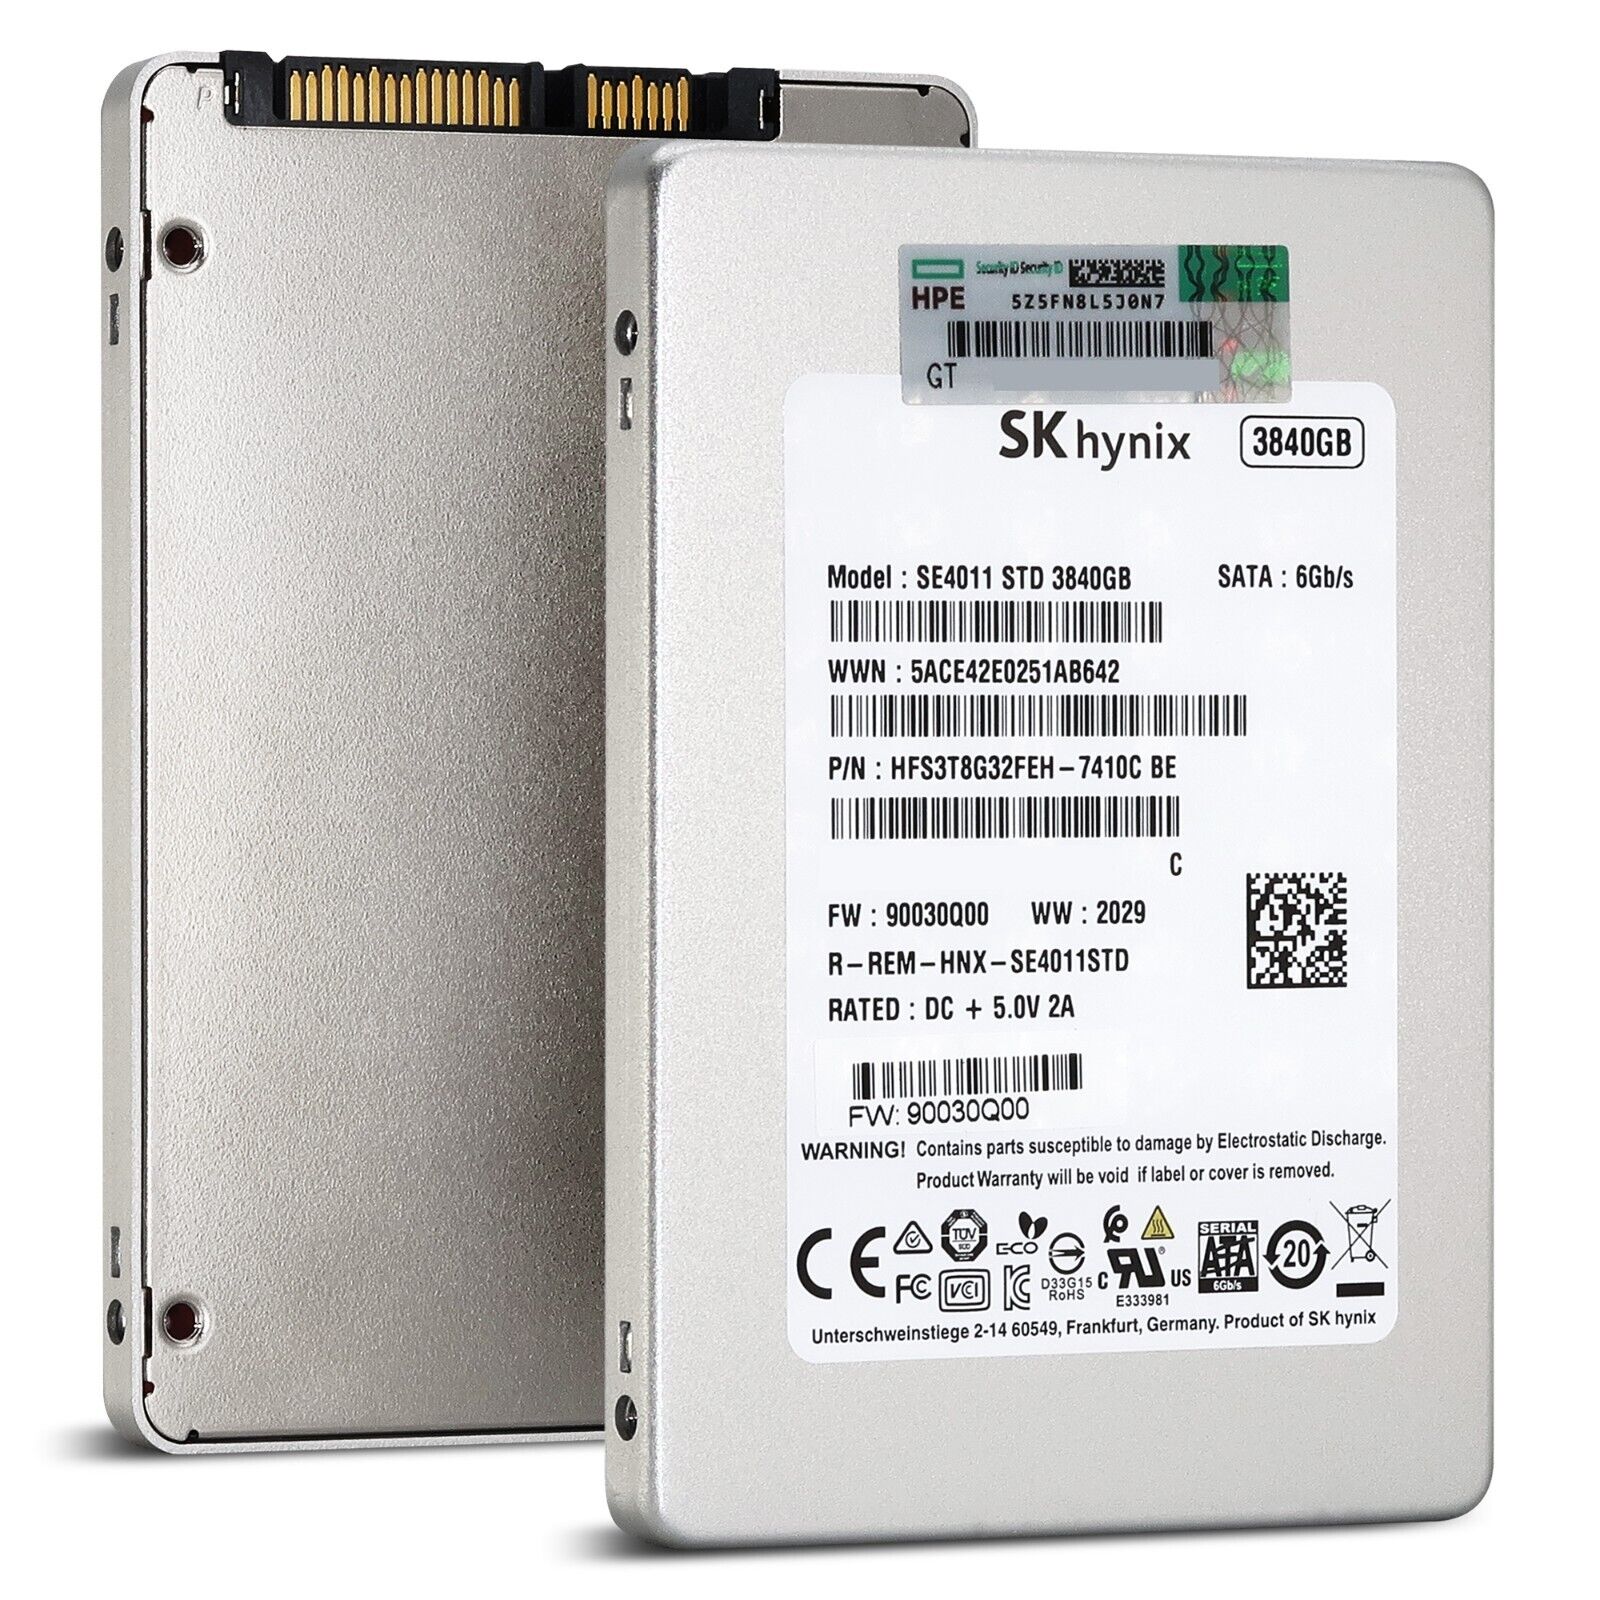 SK Hynix SE4011 HFS3T8G32FEH 3.84TB SATA 6Gb/s 3D TLC 2.5in Recertified Solid State Drive